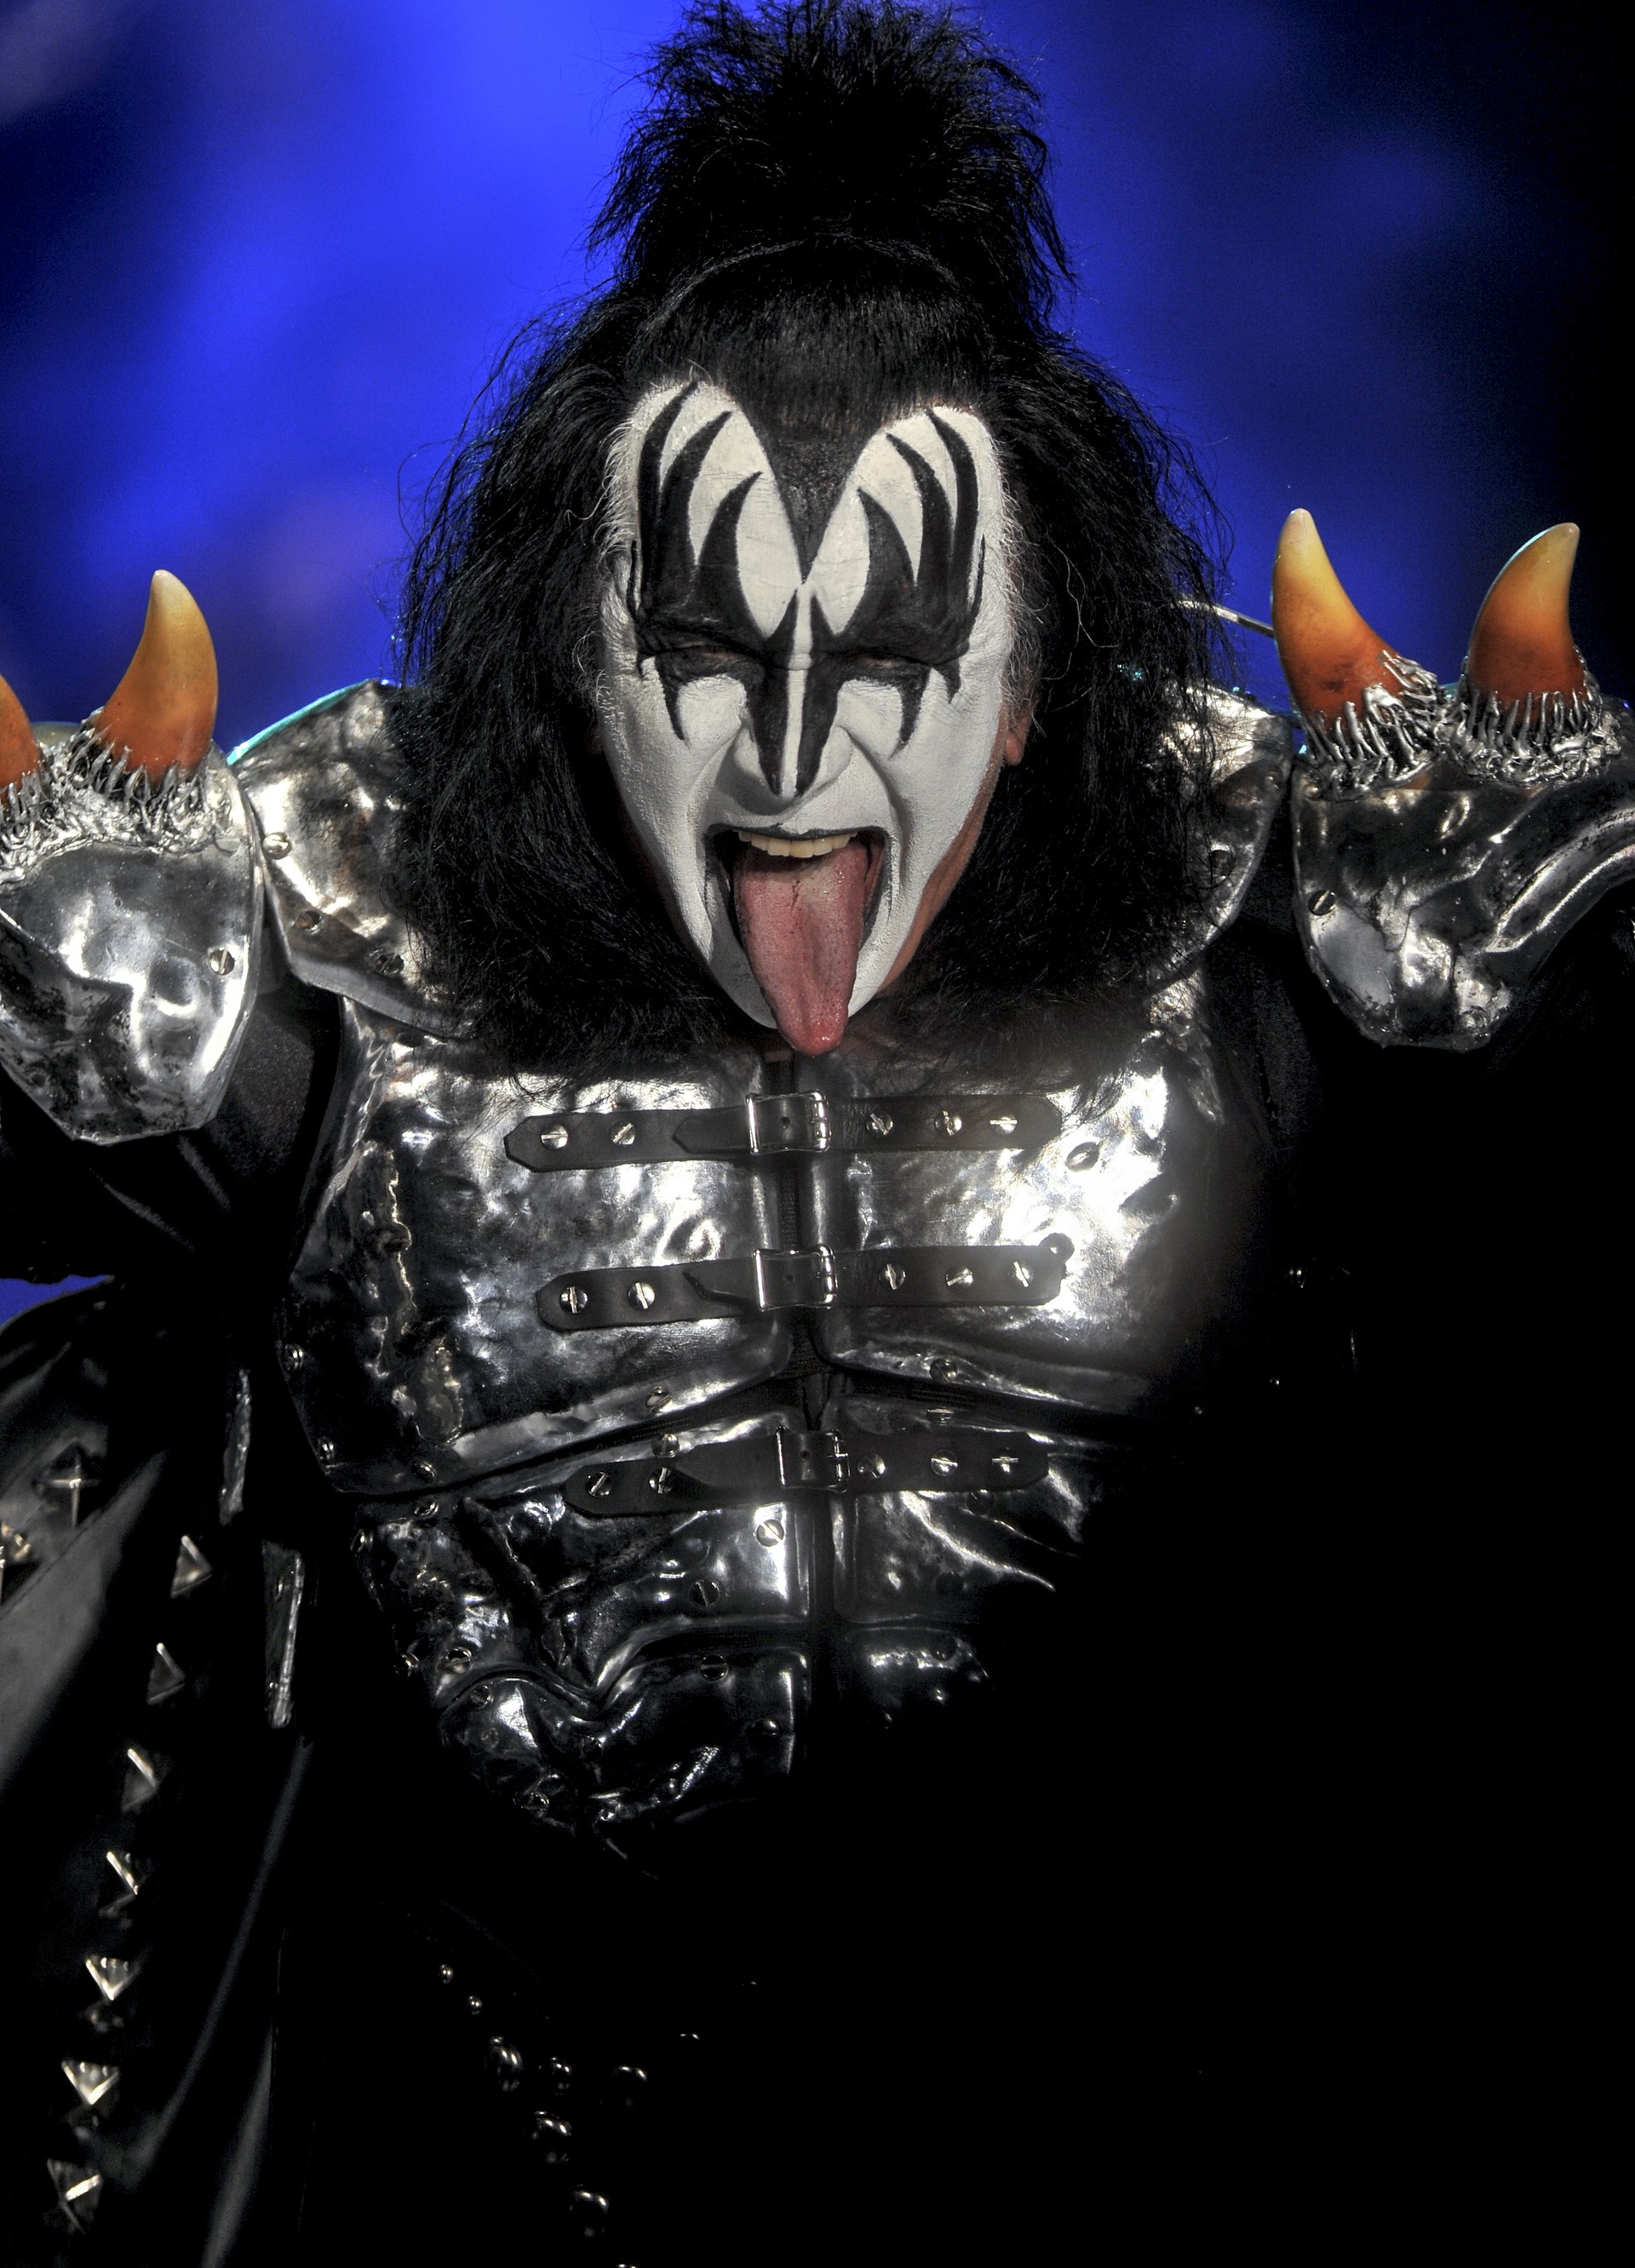 O cantor Gene Simmons (Foto: Getty Images)